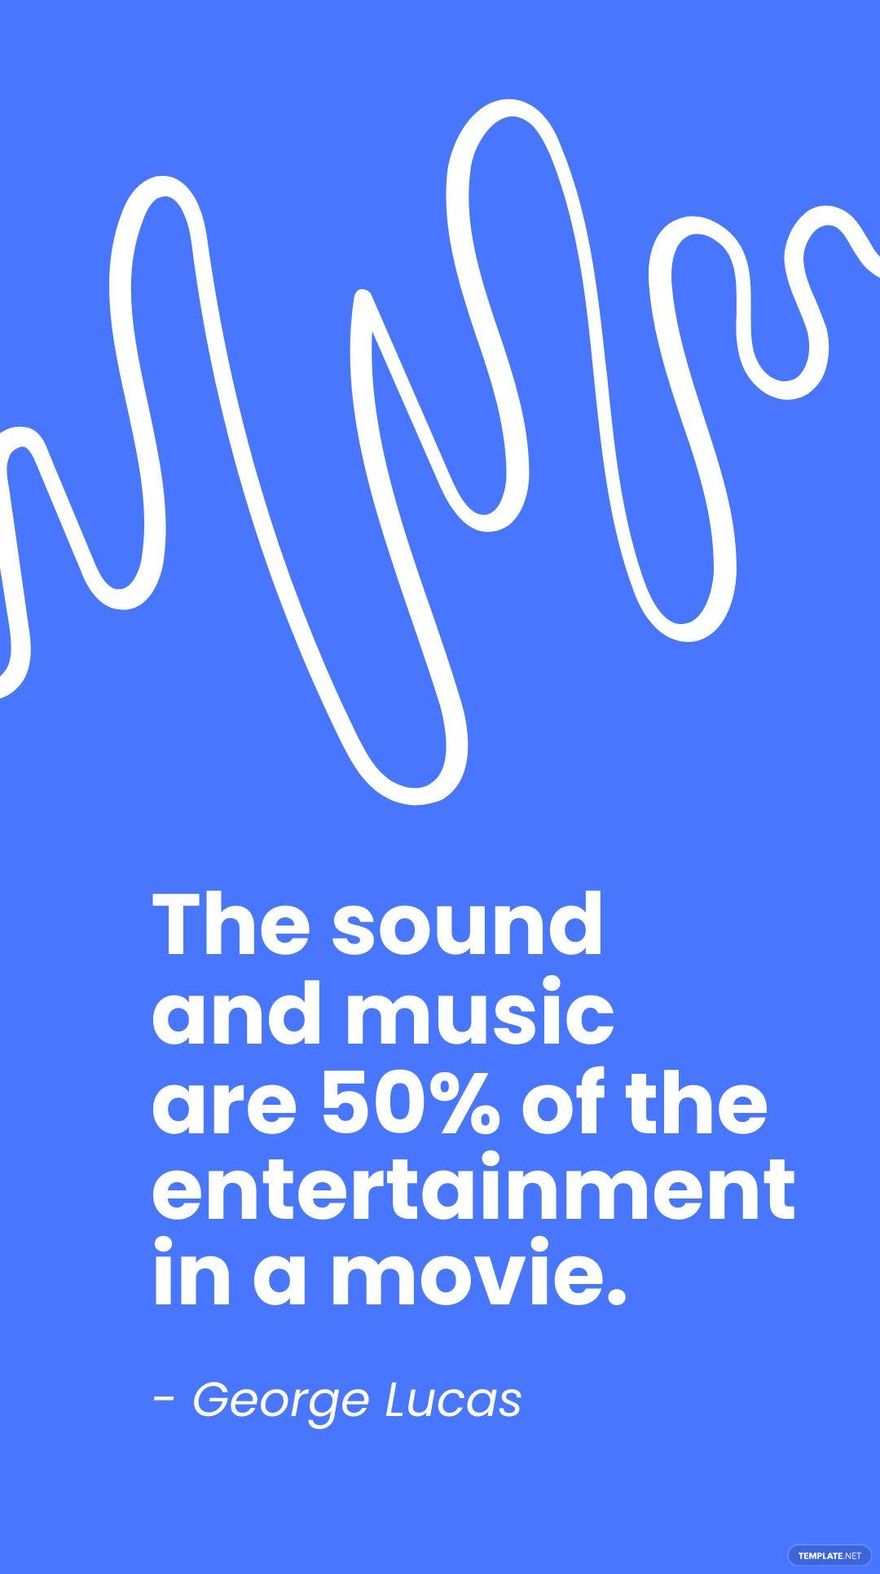 George Lucas - The sound and music are 50% of the entertainment in a movie. in JPG